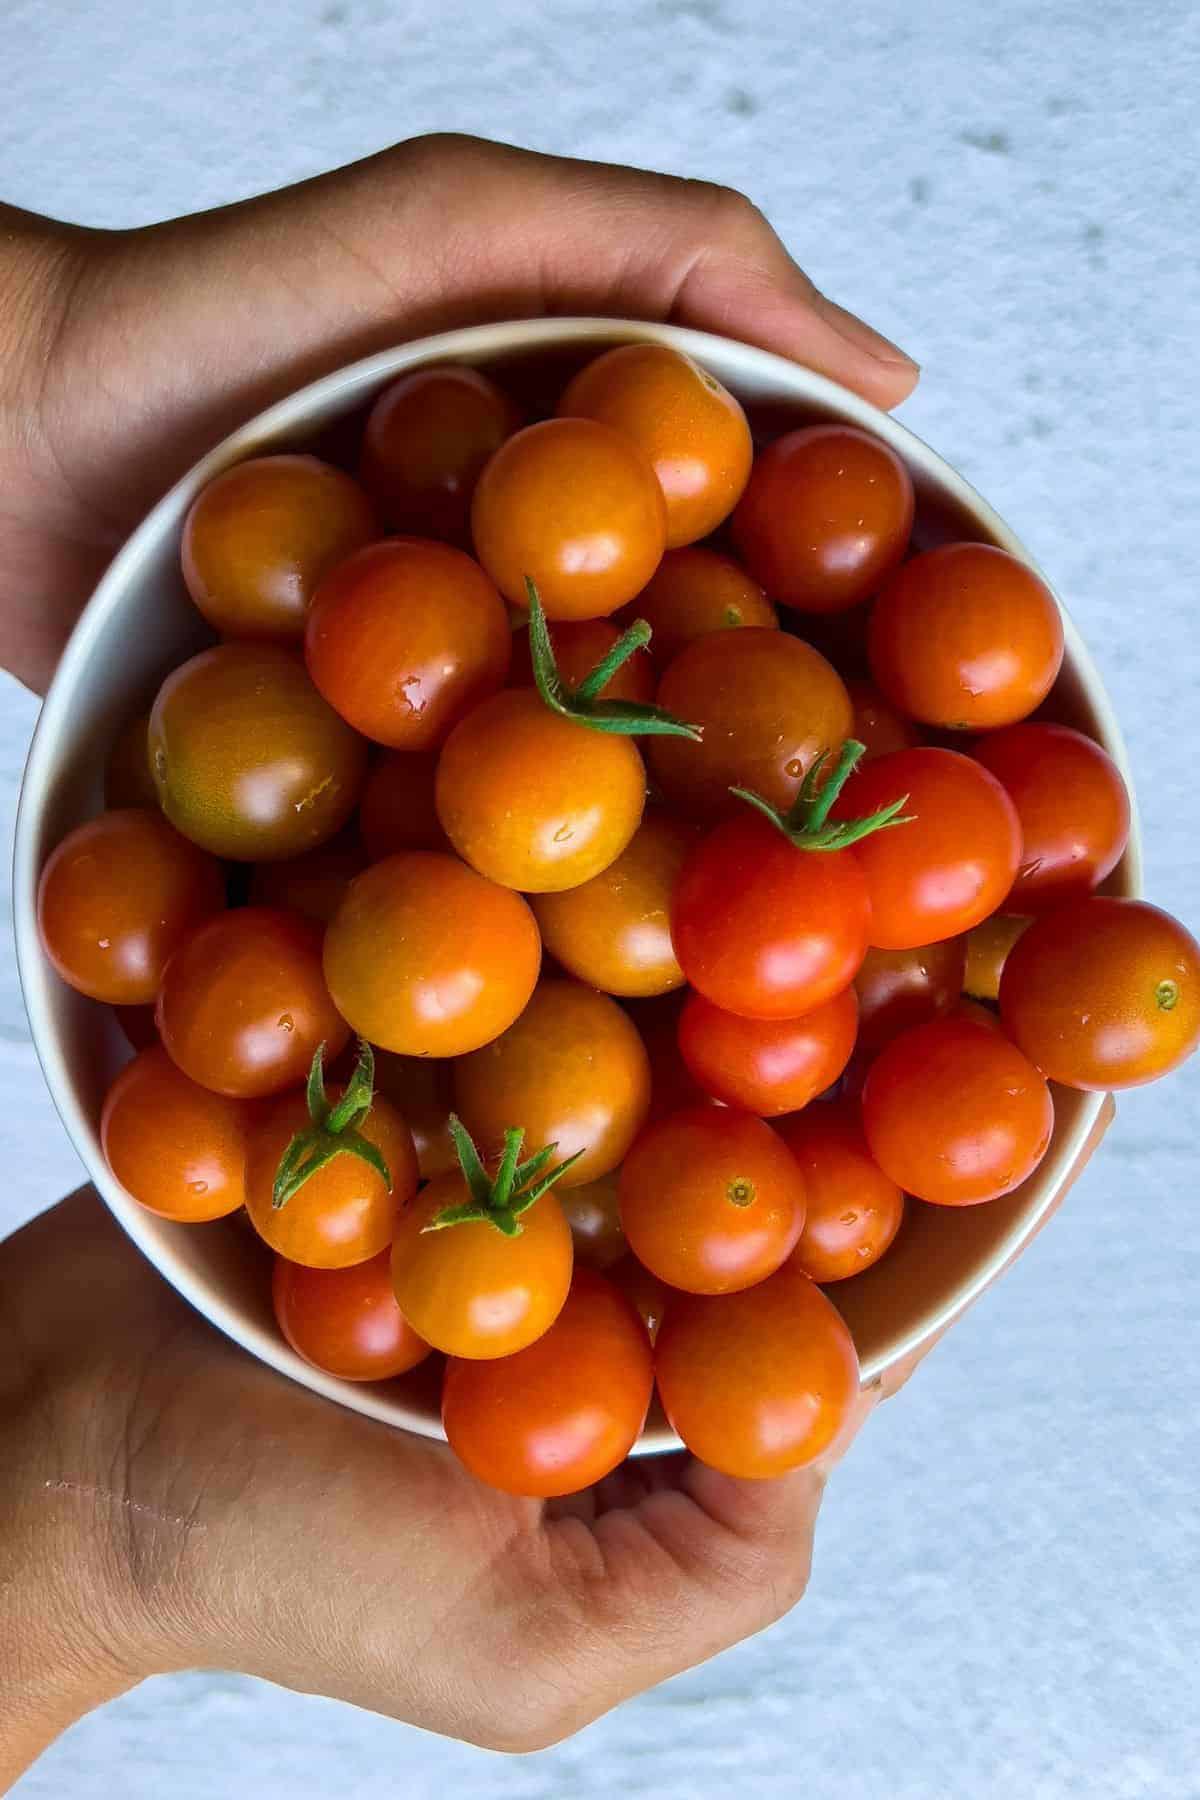 Cherry tomatoes from our garden.